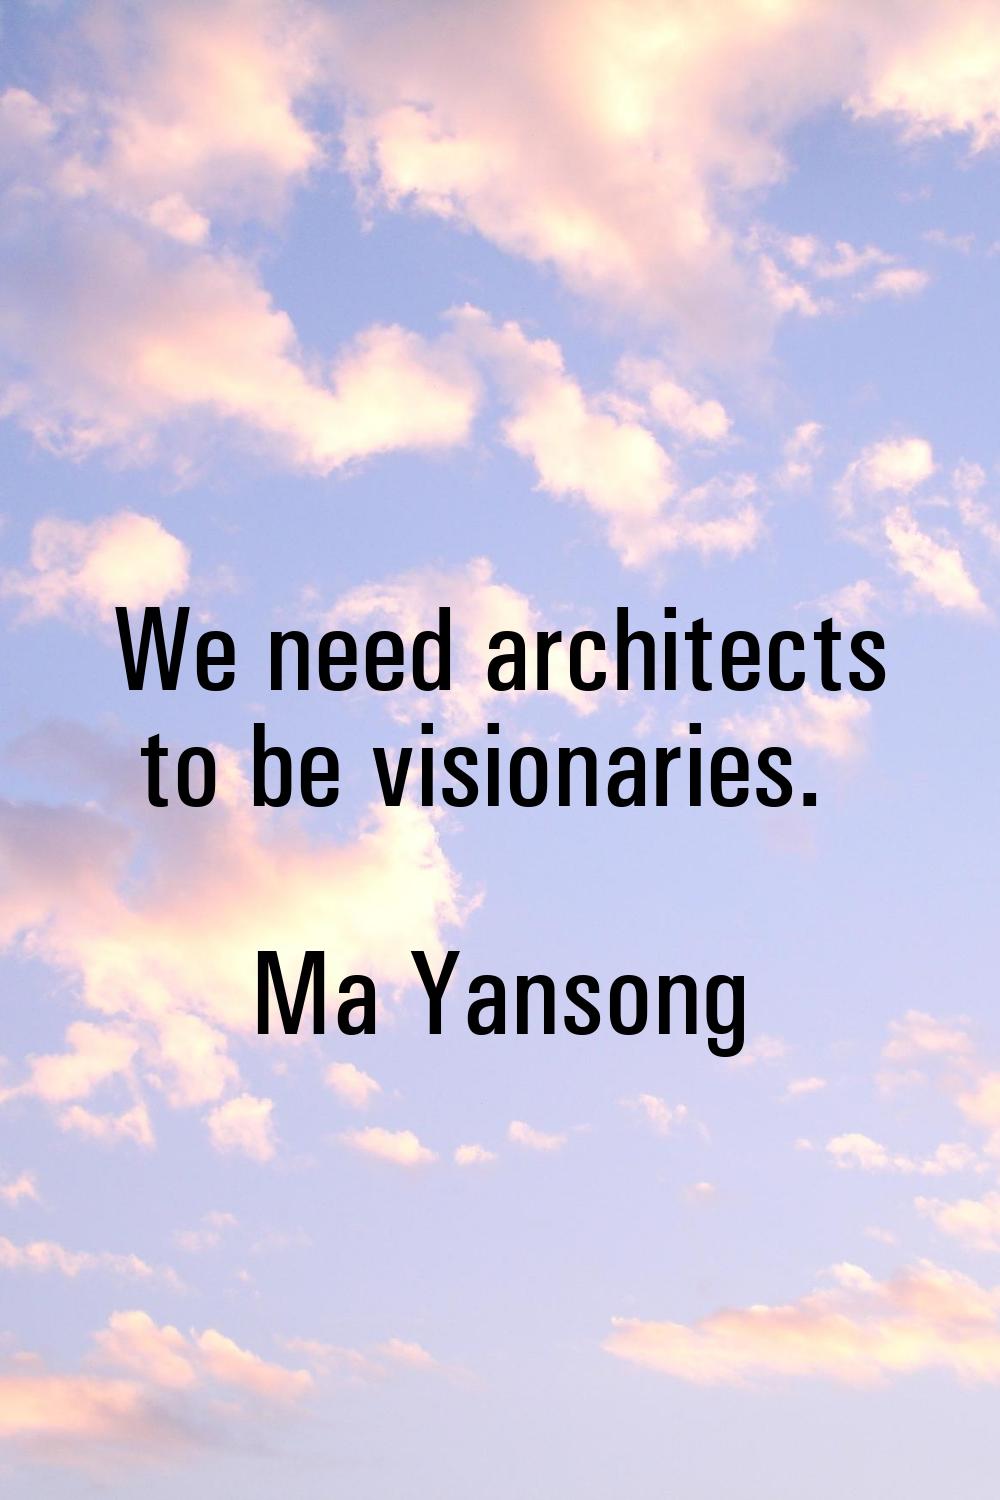 We need architects to be visionaries.